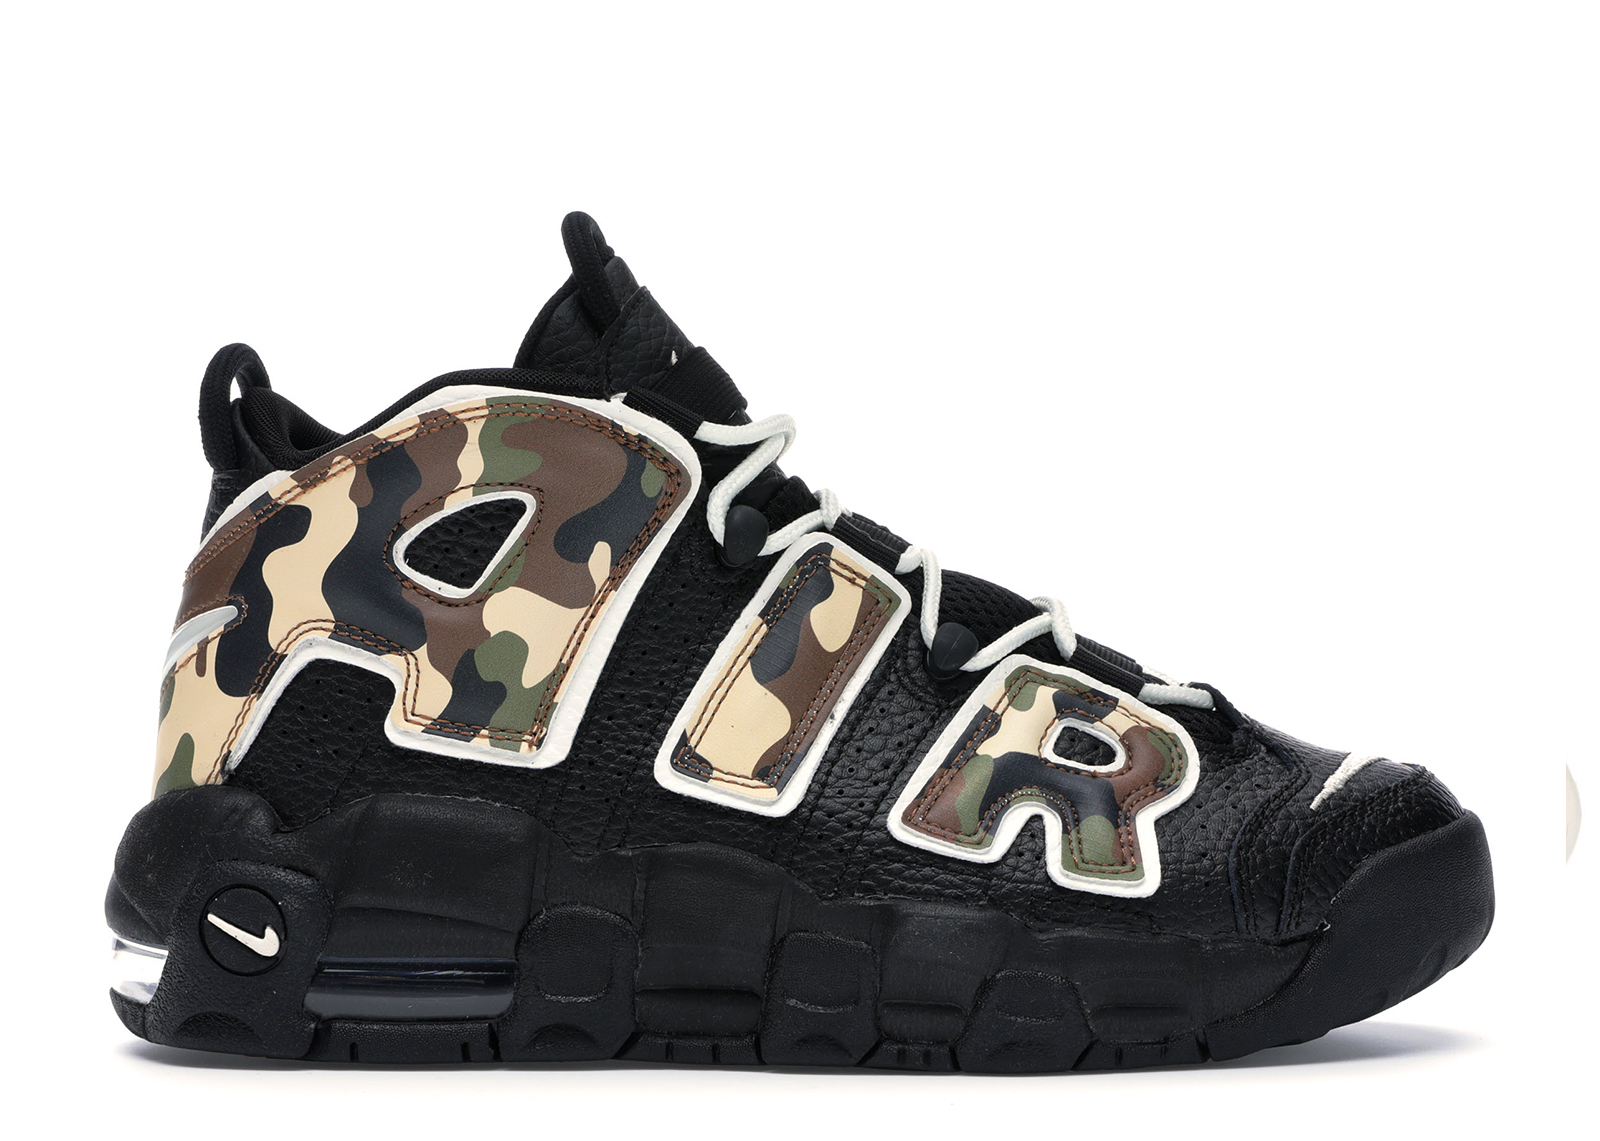 nike air uptempo 96 black and white